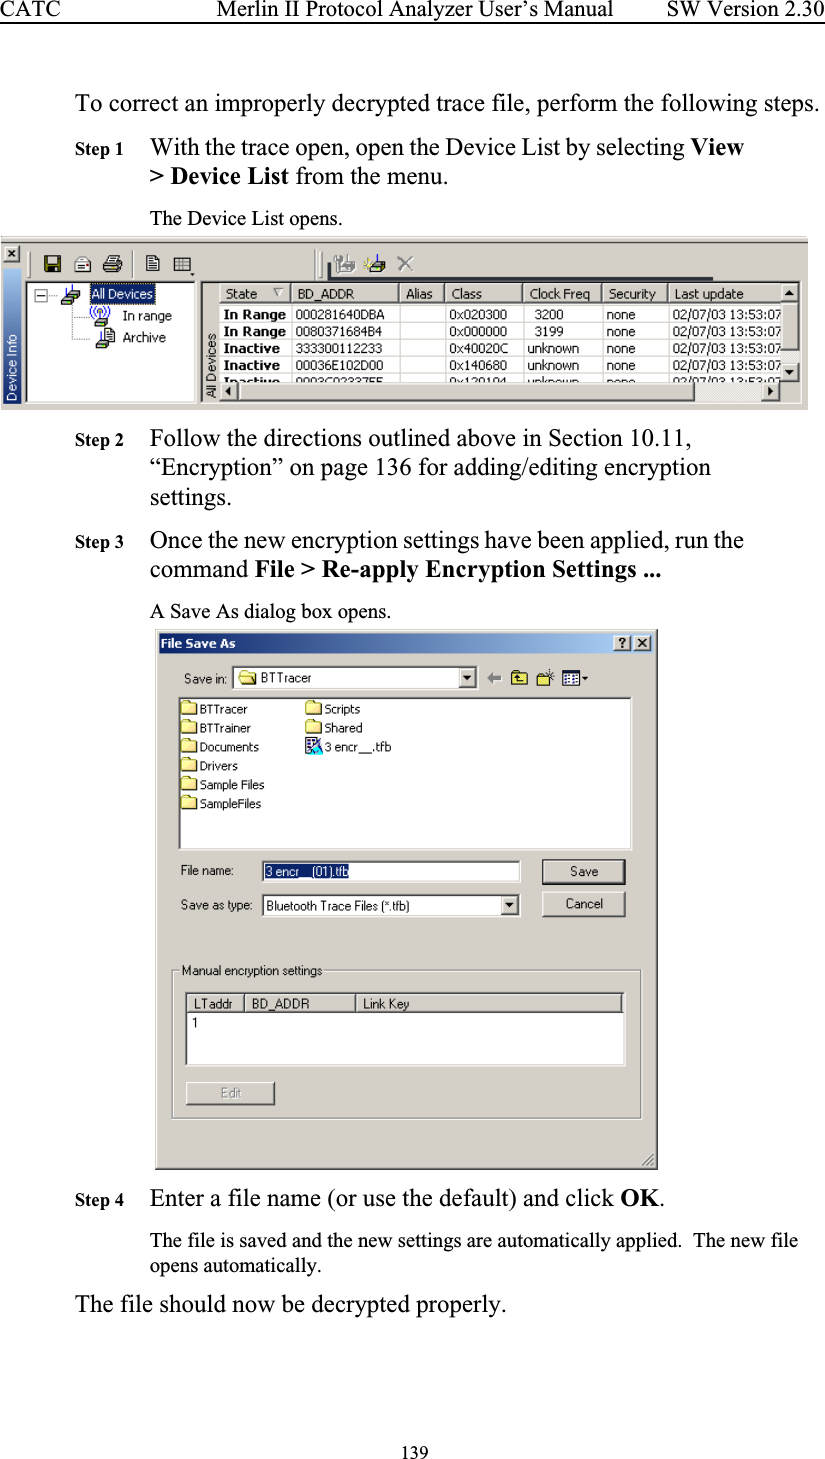  139 Merlin II Protocol Analyzer User’s ManualCATC SW Version 2.30To correct an improperly decrypted trace file, perform the following steps.Step 1 With the trace open, open the Device List by selecting View &gt; Device List from the menu.The Device List opens.Step 2 Follow the directions outlined above in Section 10.11, “Encryption” on page 136 for adding/editing encryption settings.Step 3 Once the new encryption settings have been applied, run the command File &gt; Re-apply Encryption Settings ...A Save As dialog box opens.   Step 4 Enter a file name (or use the default) and click OK.  The file is saved and the new settings are automatically applied.  The new file opens automatically.The file should now be decrypted properly.